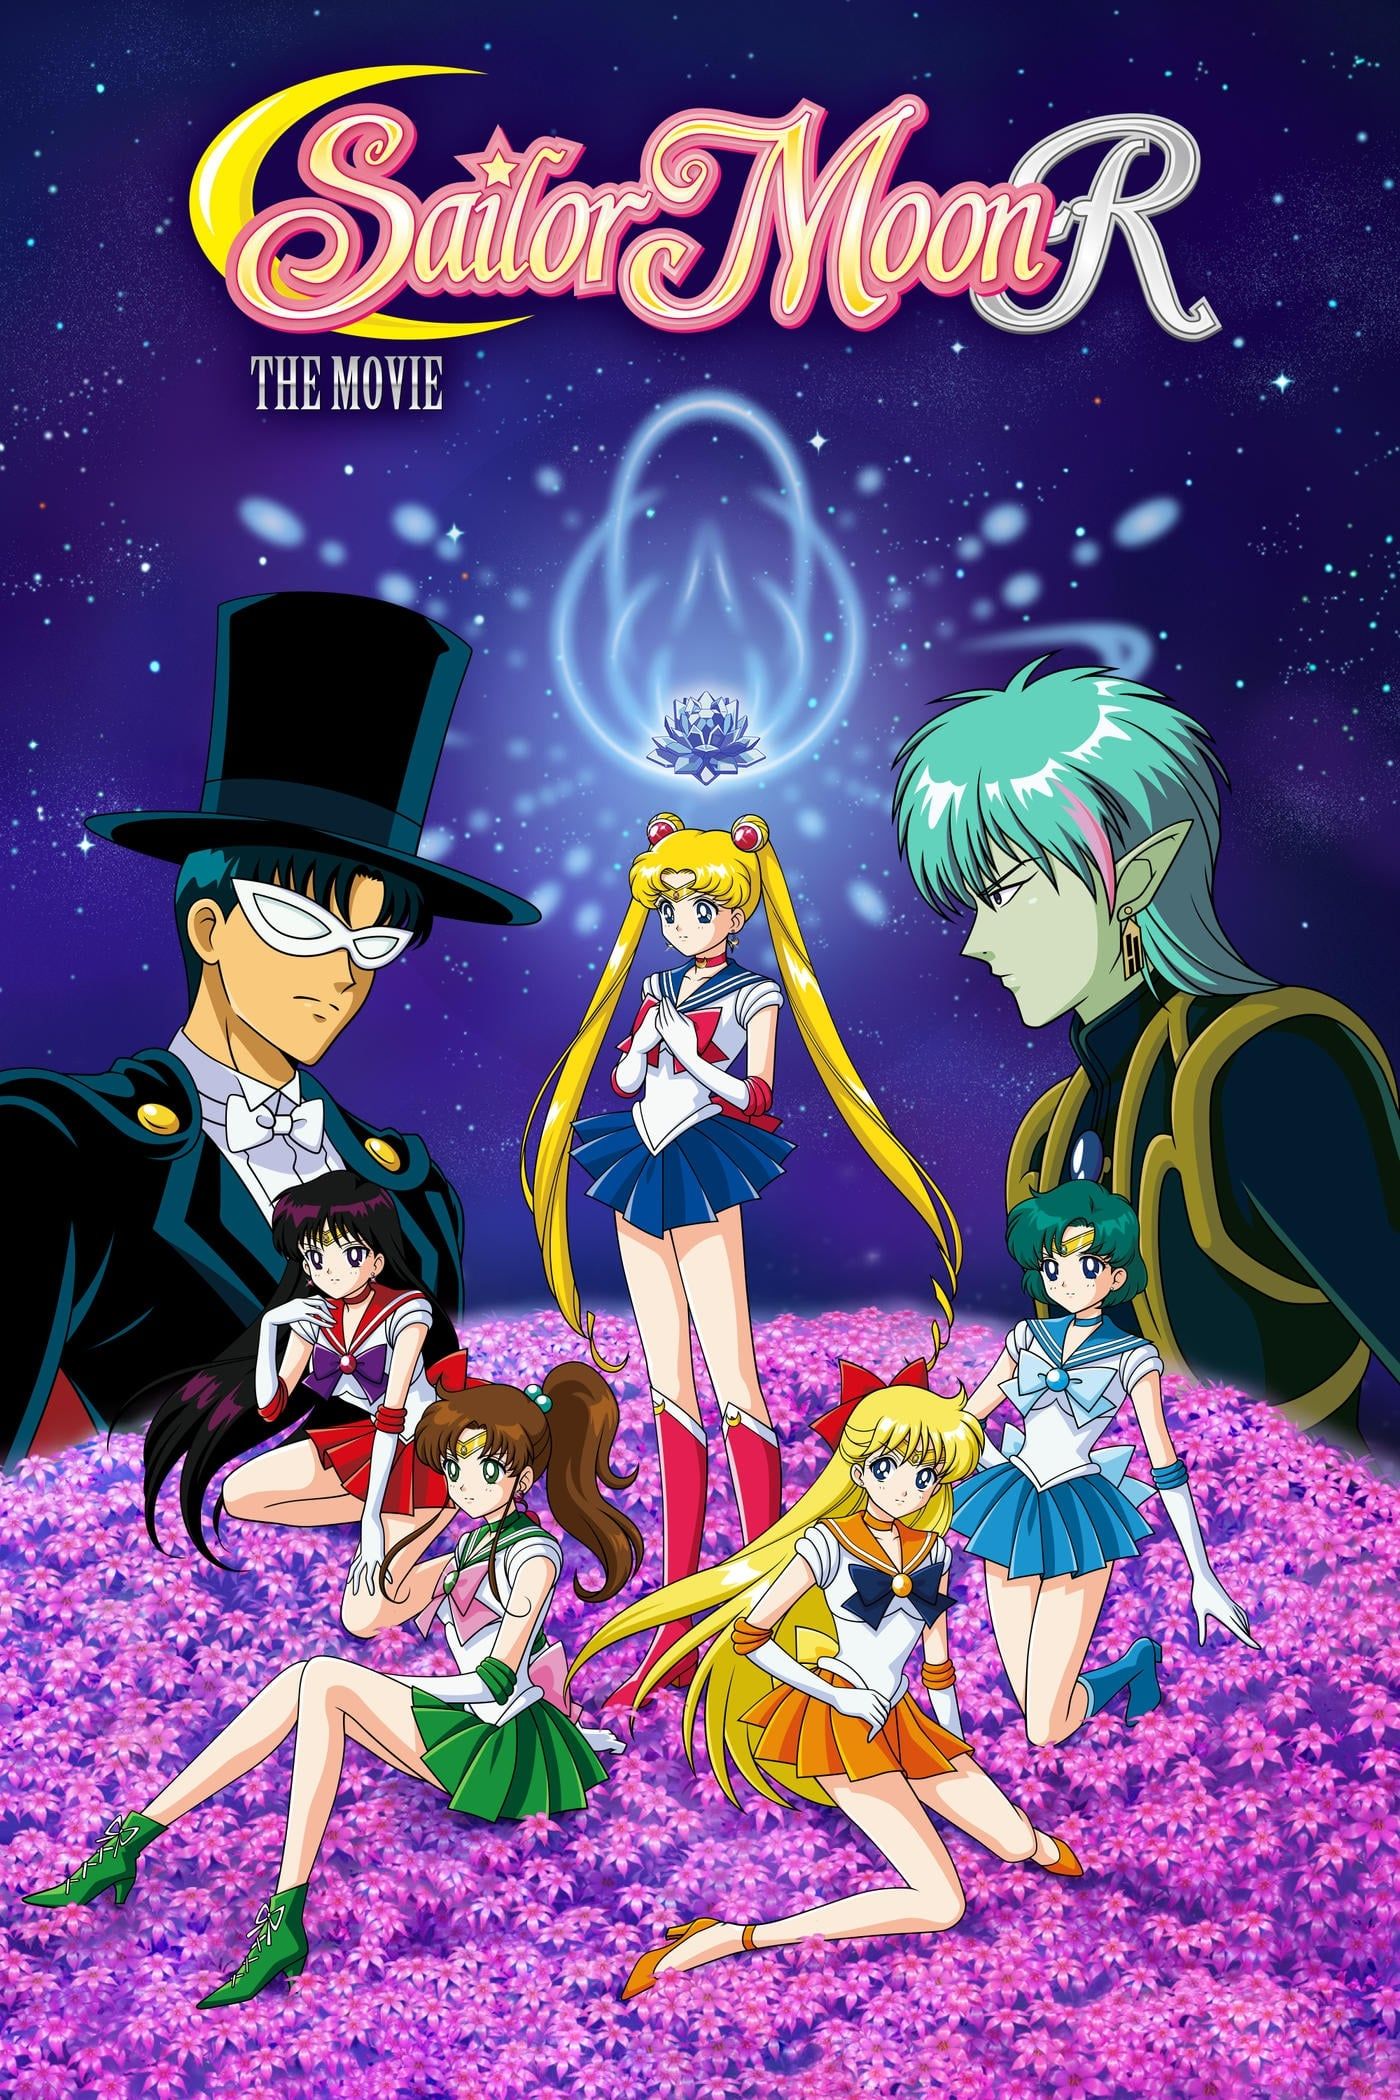 Sailor Moon R: The Movie (Movie) (Sub) New Released